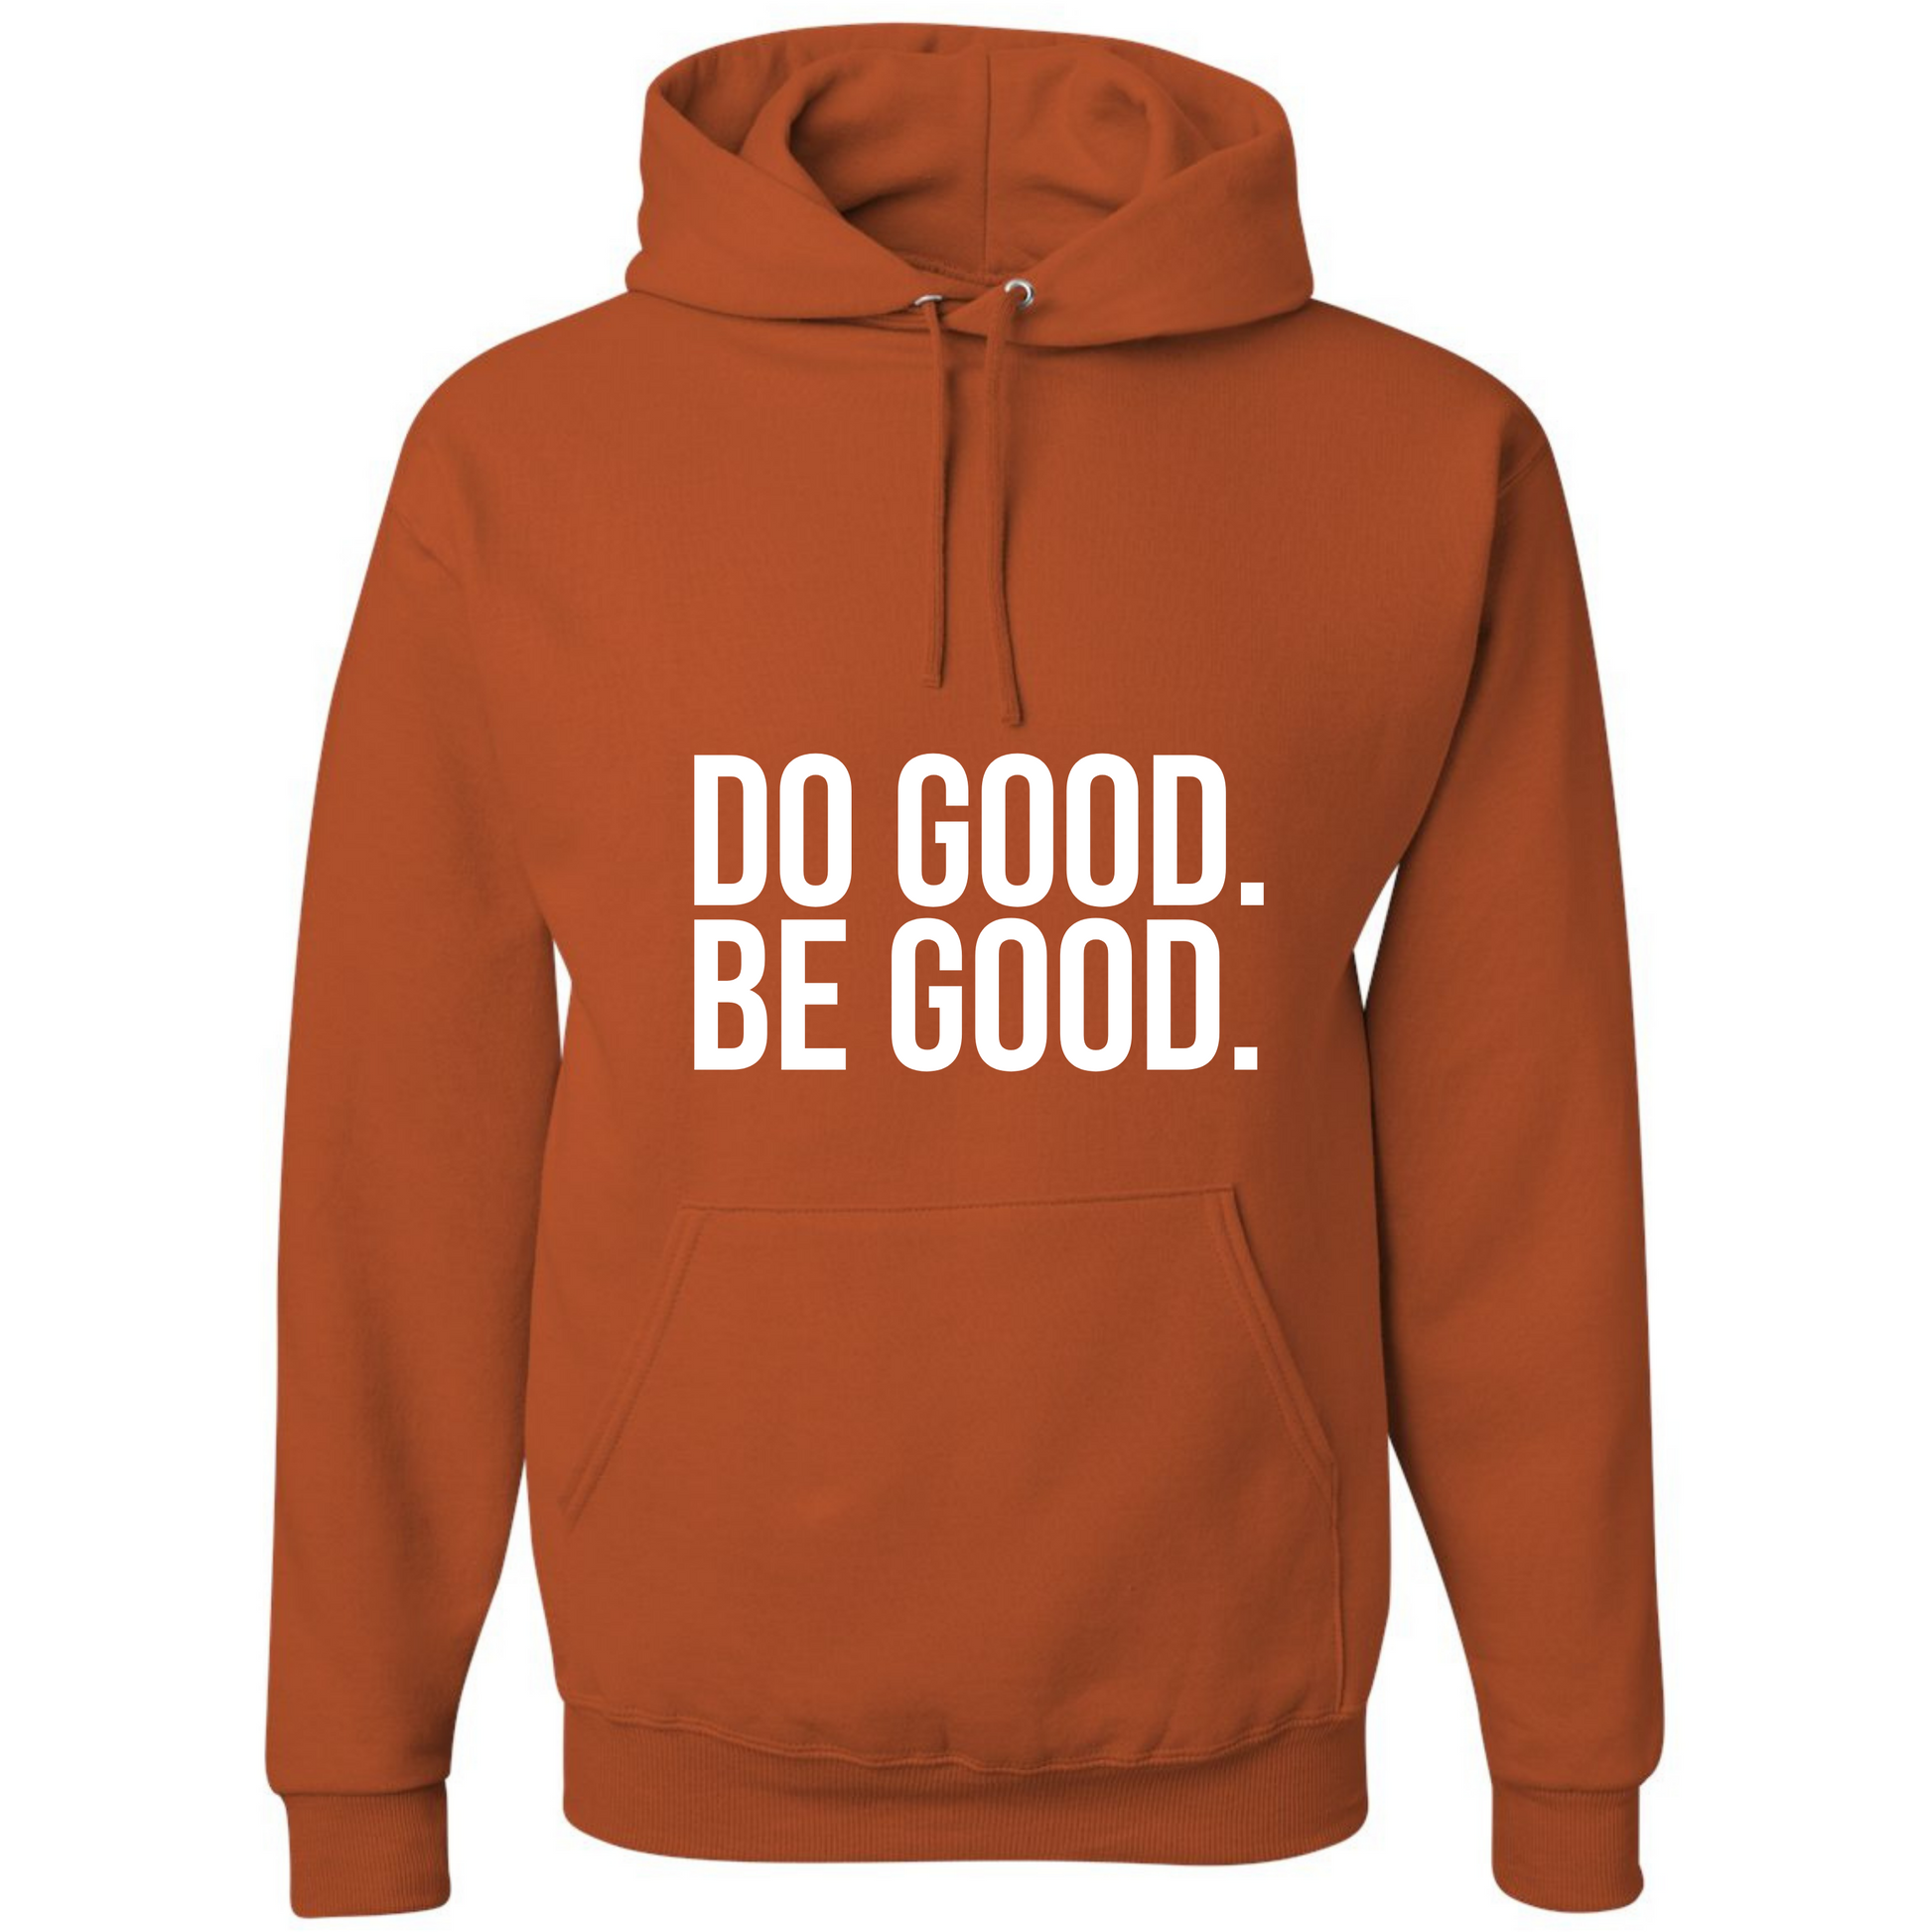 Do Go Be Good affirmation hoodie from Sol Rise Essentials burnt orange/white colors